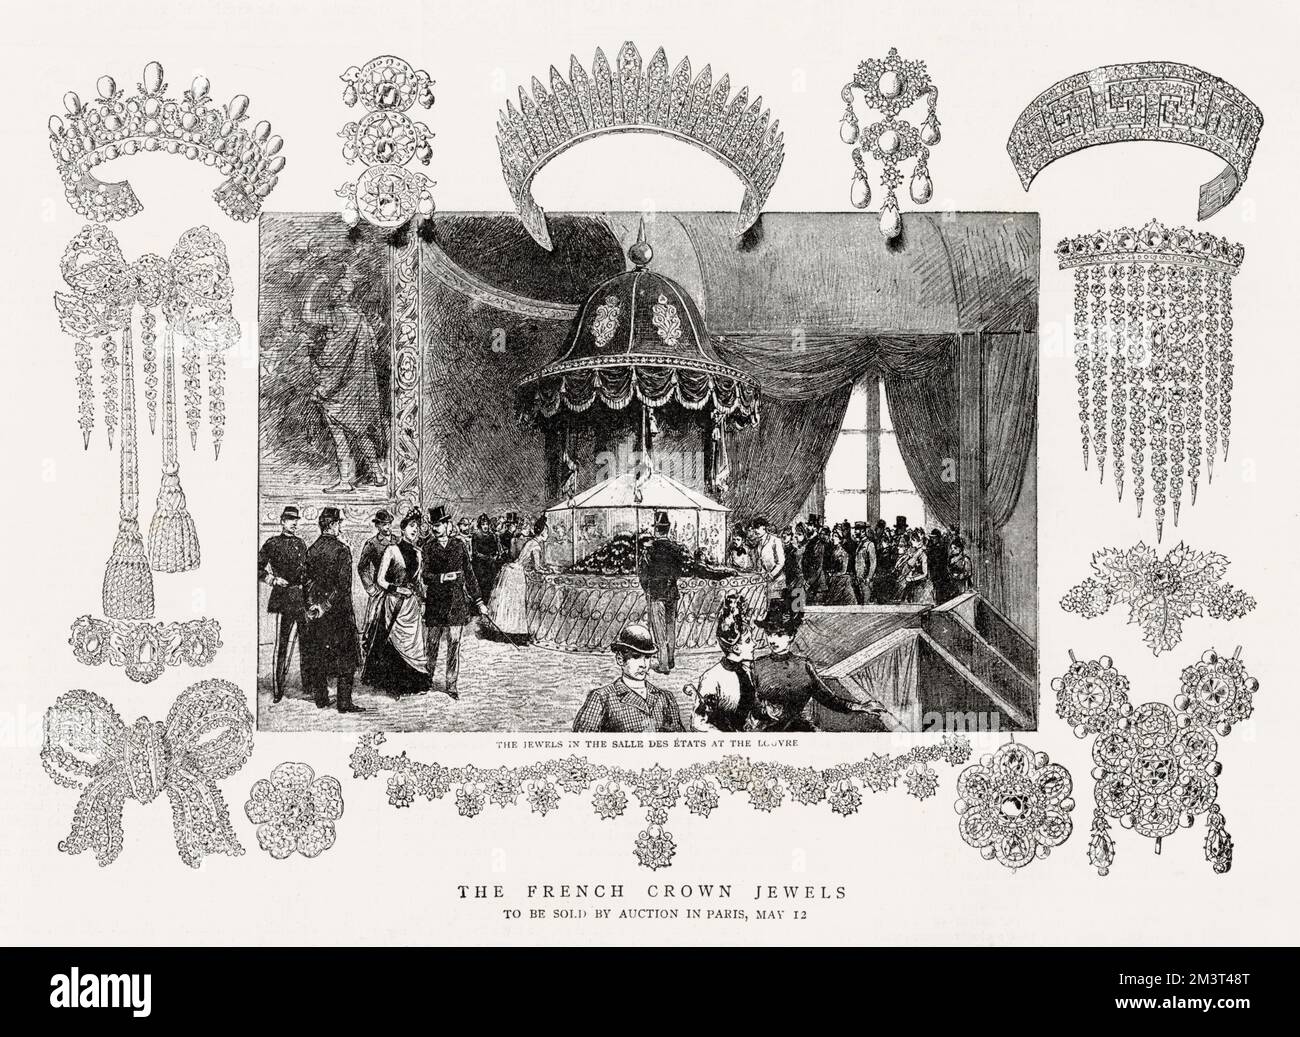 The French Crown Jewels, to be sold at auction in Paris, 12th May 1887. The jewels in the Salle des Etats at the Louvre. Stock Photo